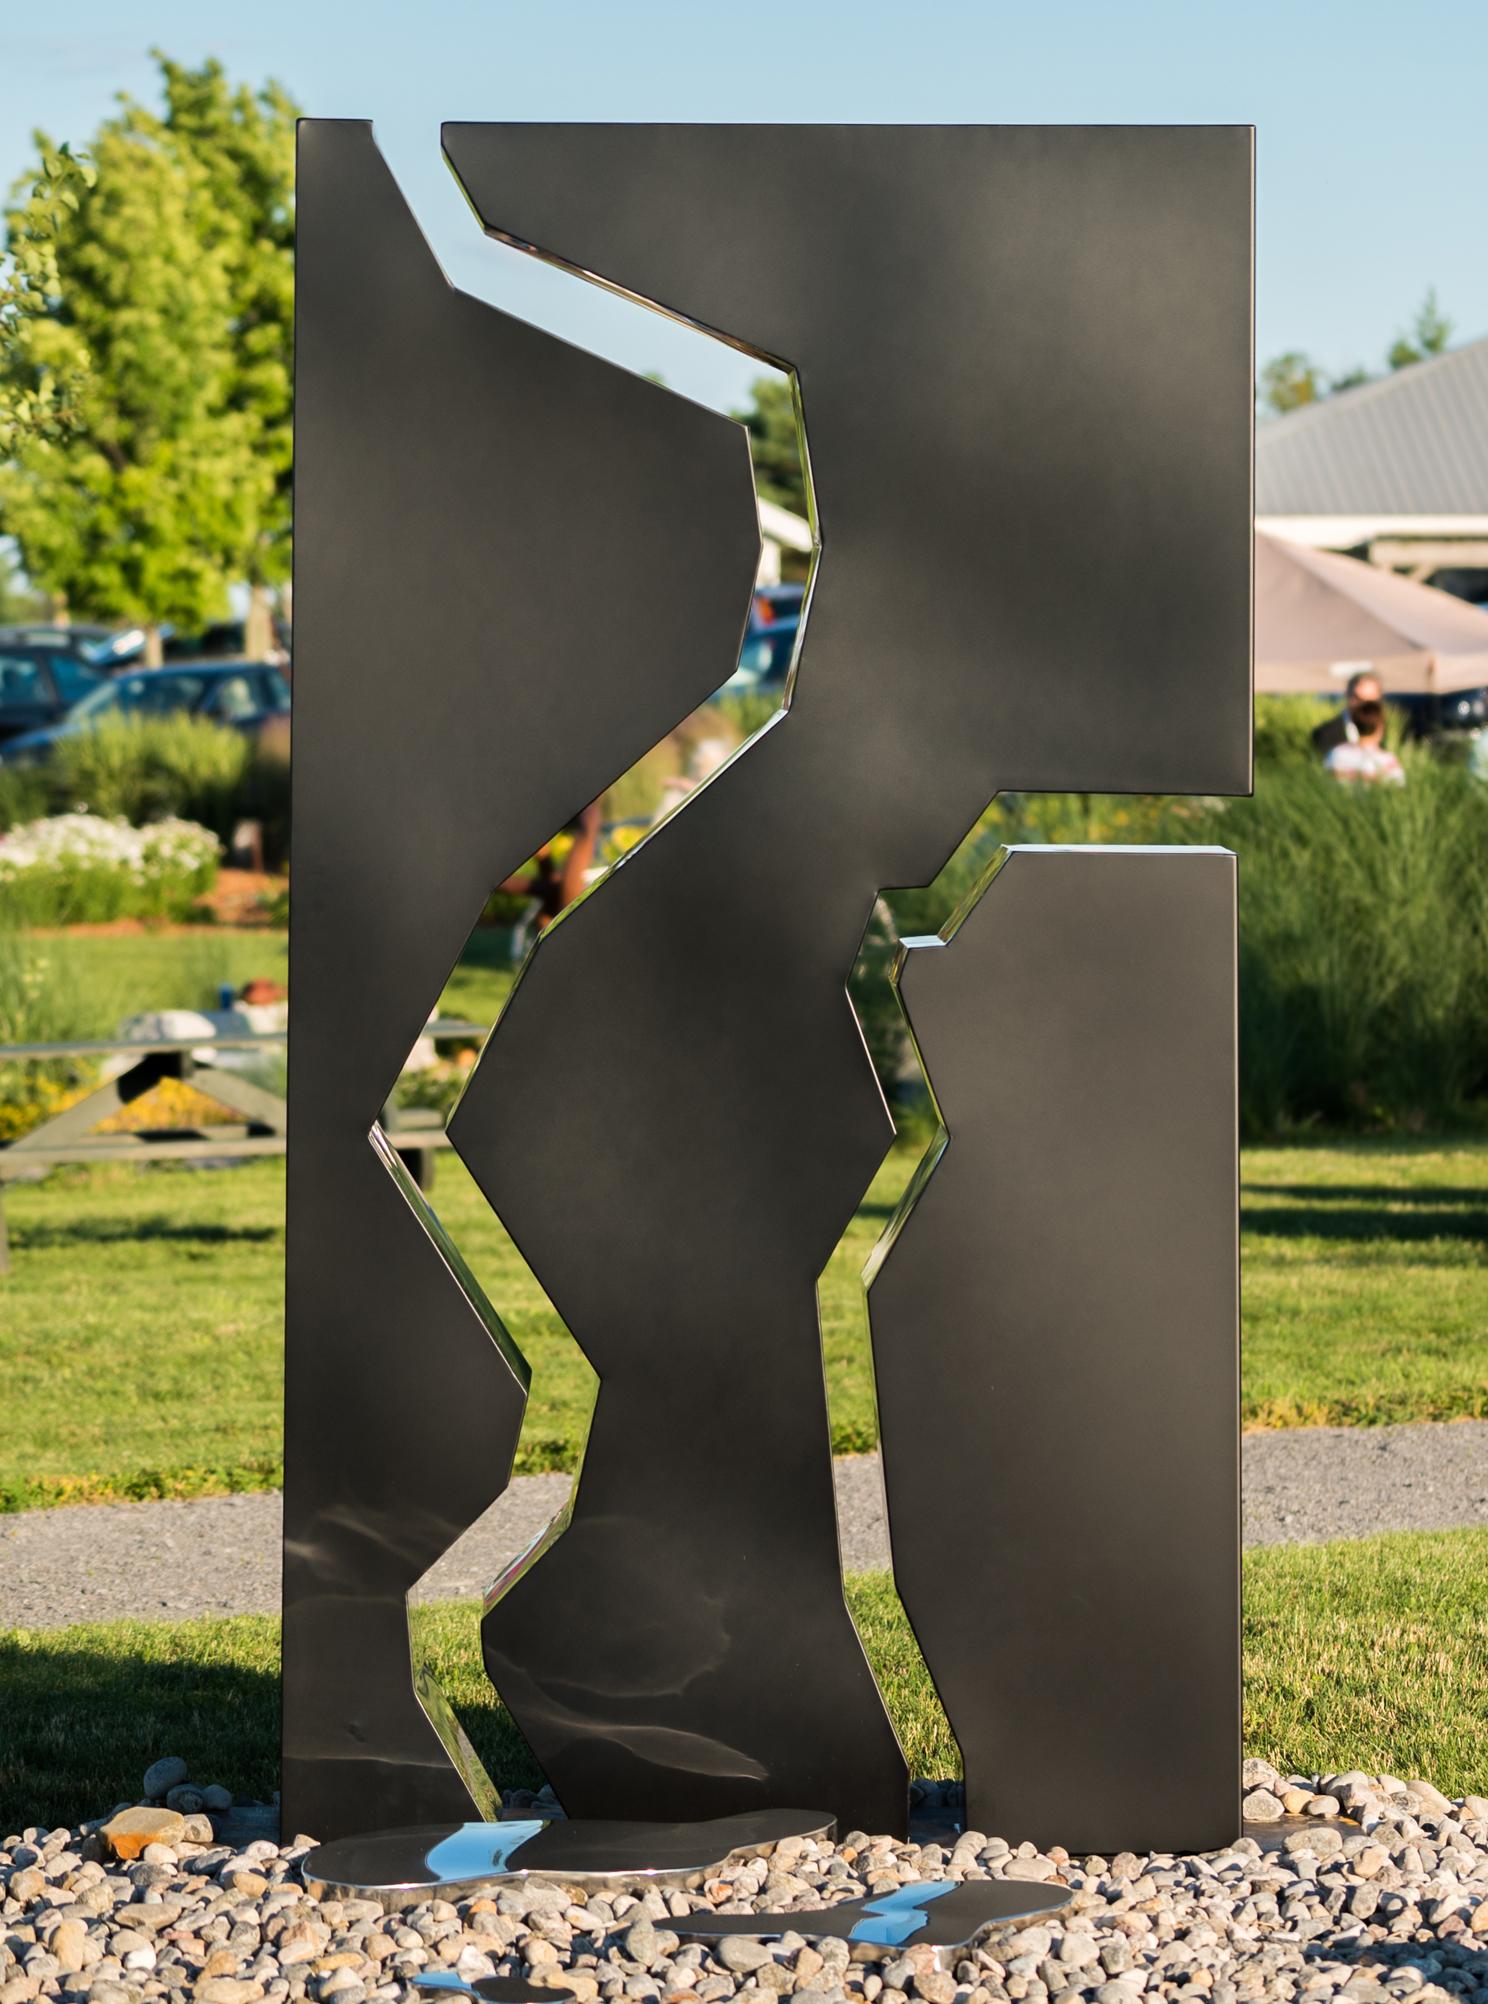 Aquagraphie Variation 2 - modern, geometric abstract, outdoor steel sculpture